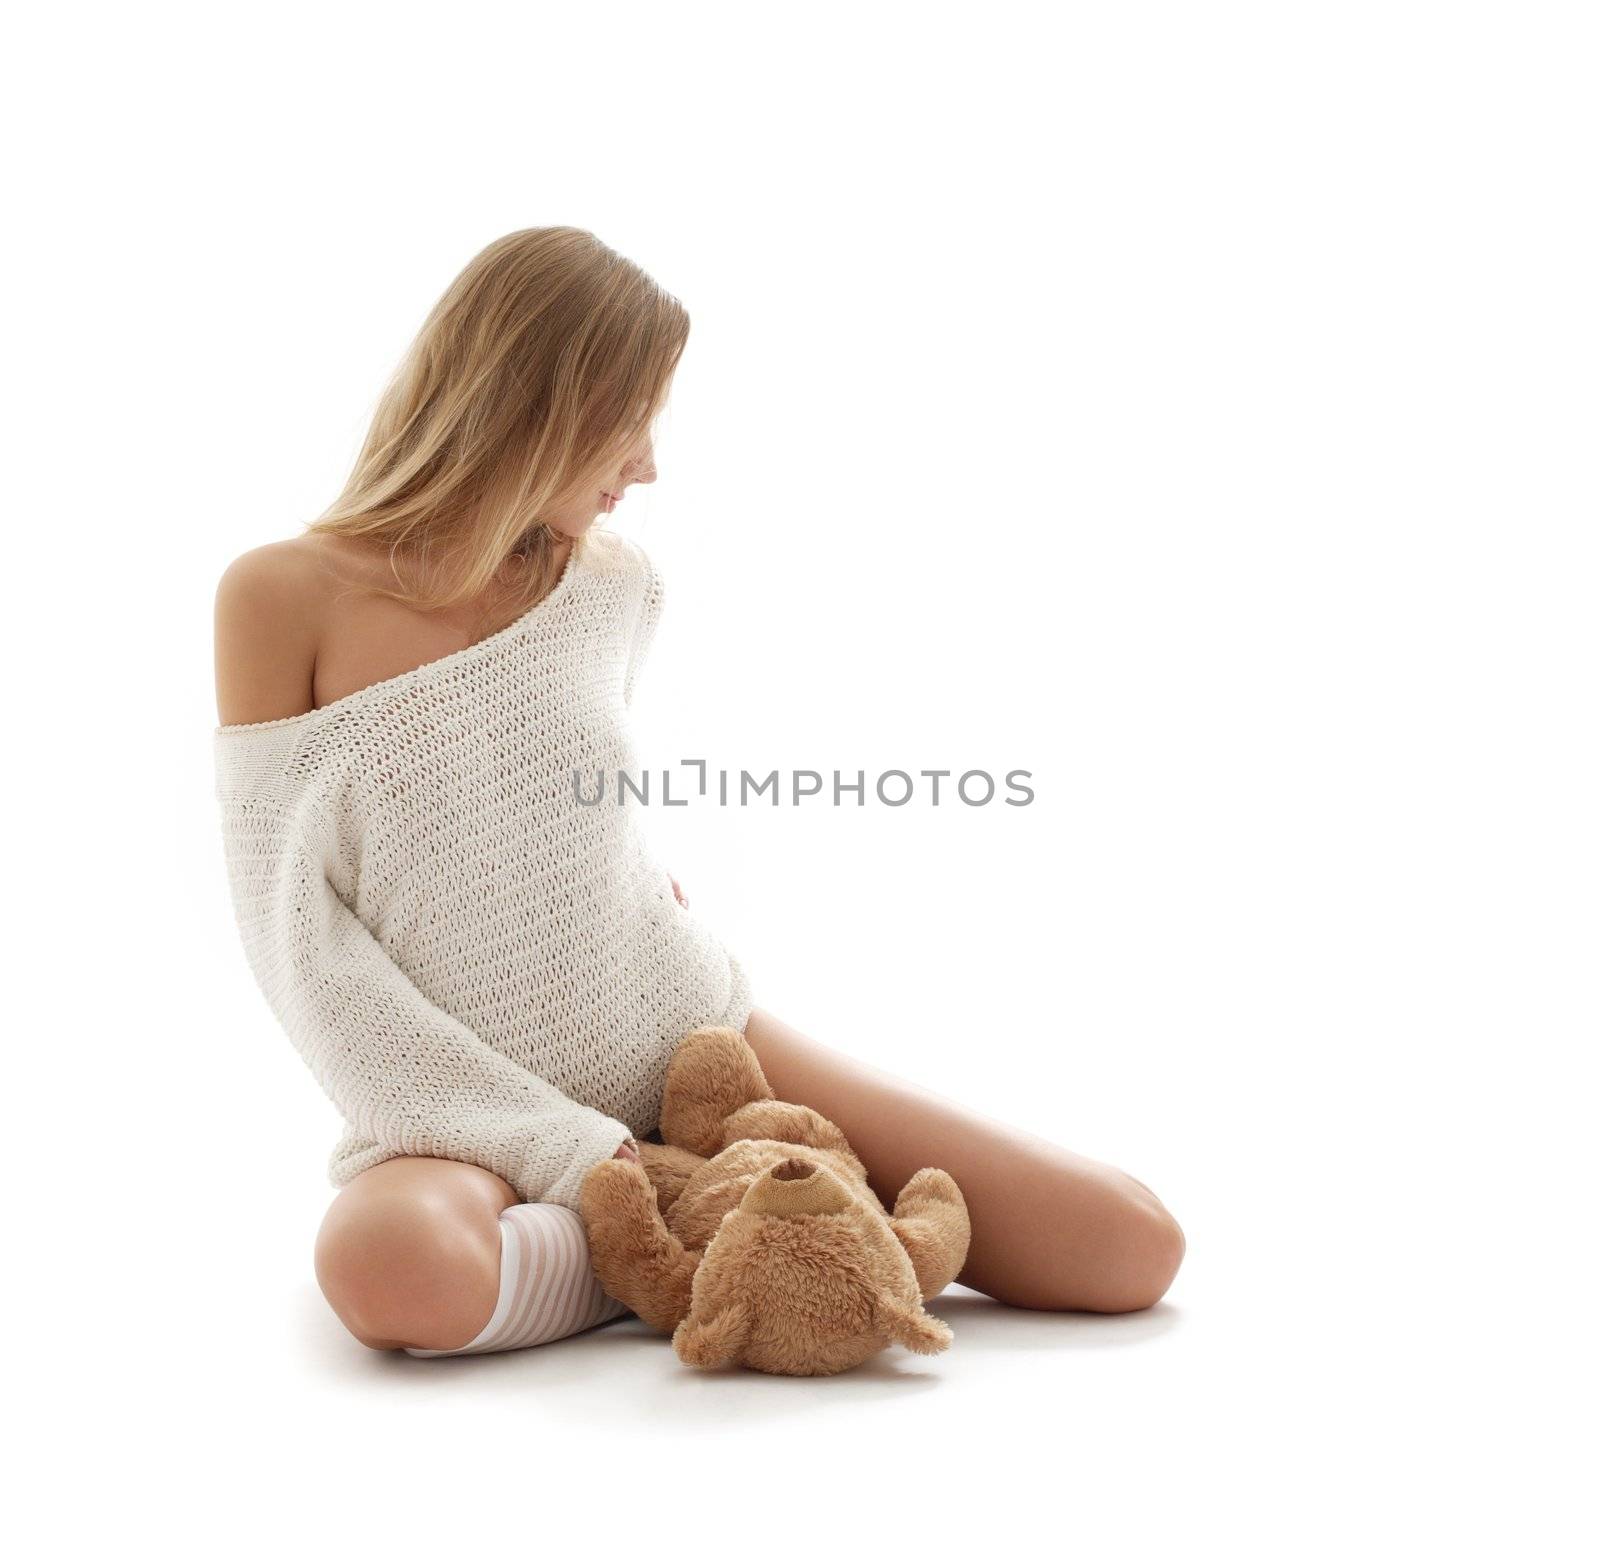 lovely blond in white sweater with teddy bear by dolgachov